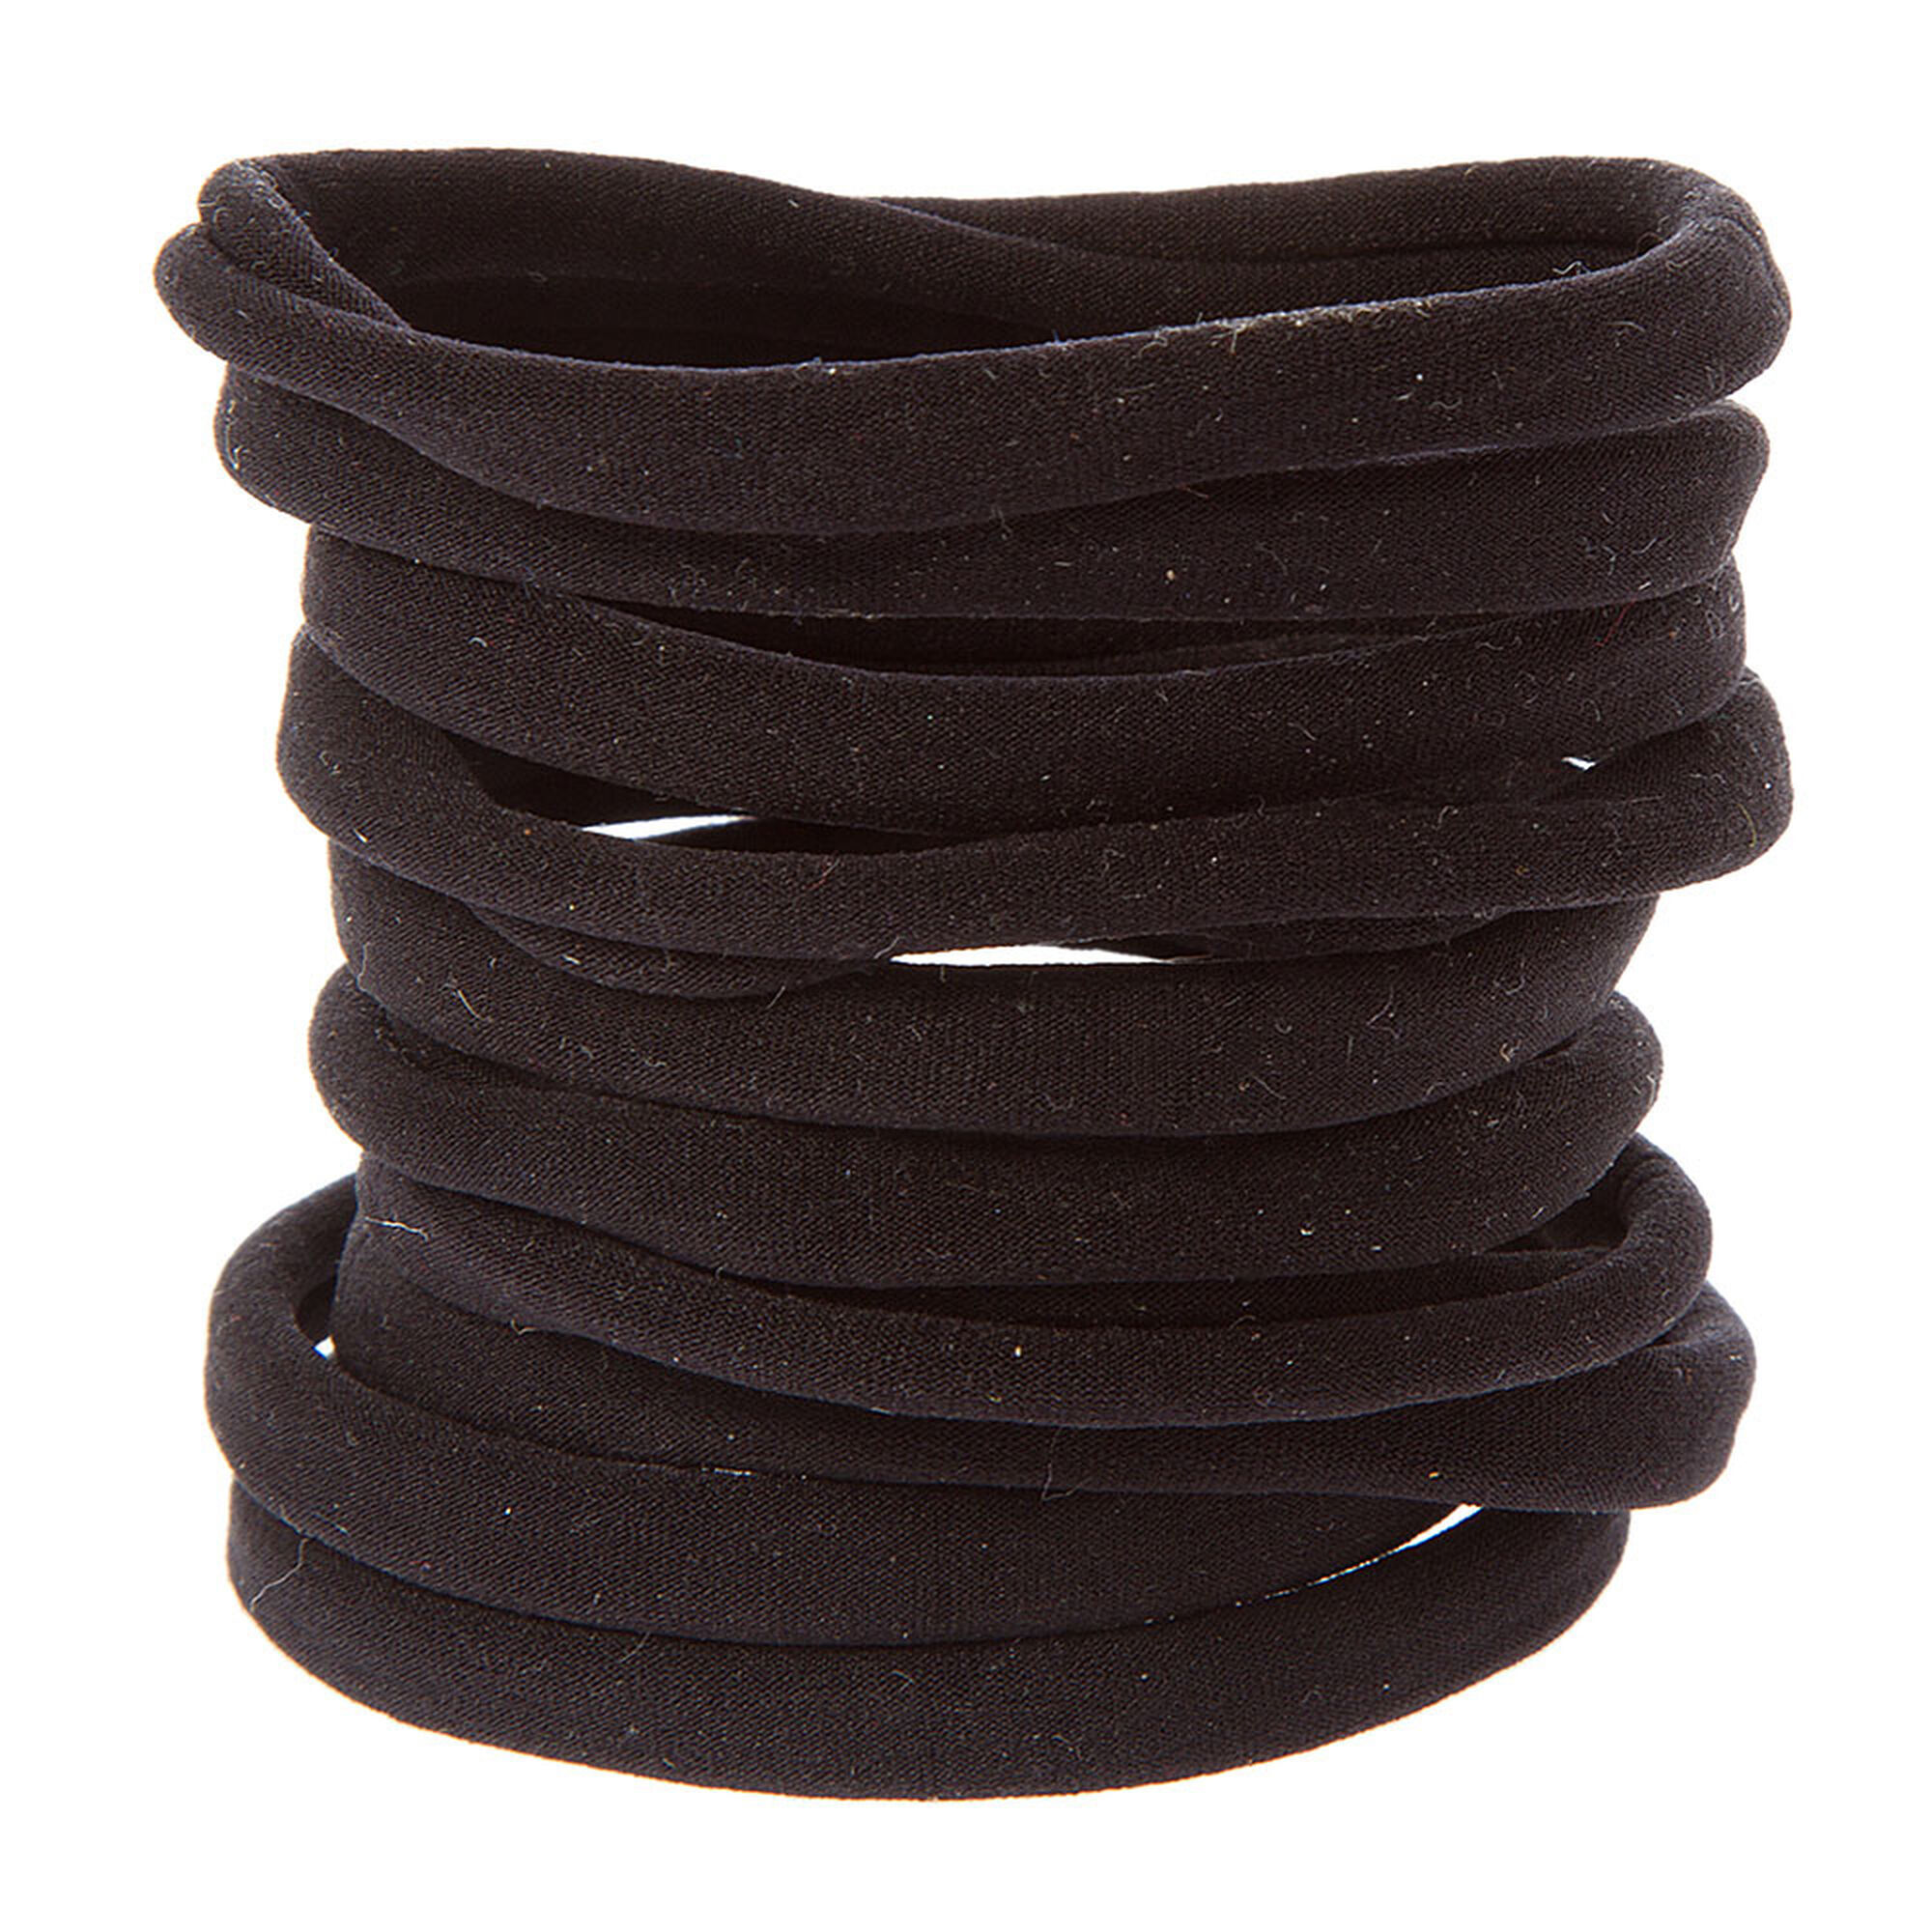 View Claires Rolled Hair Ties 10 Pack Black information